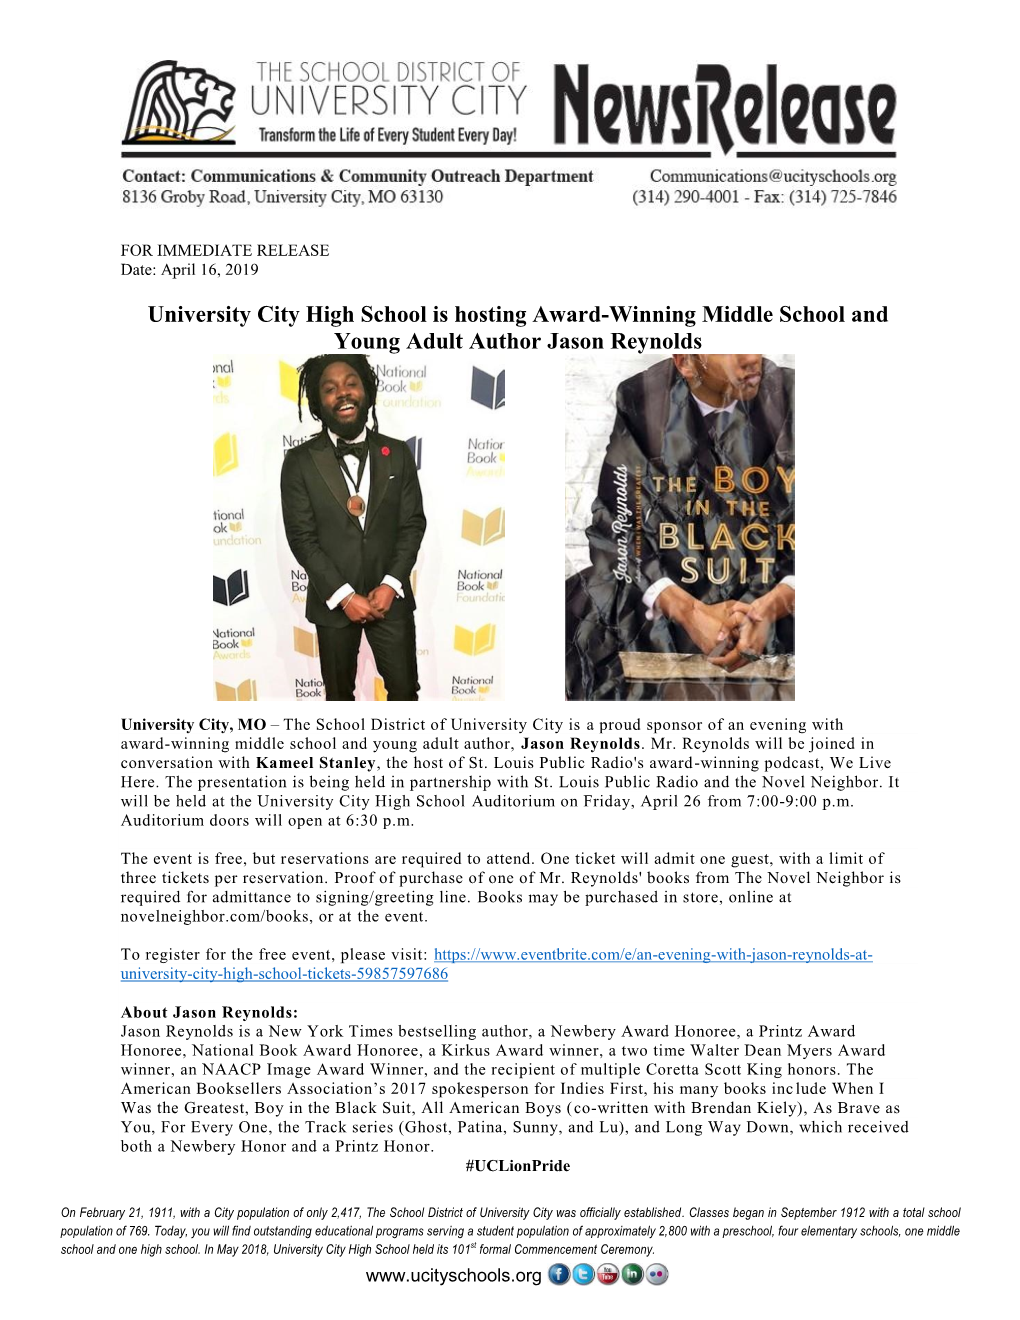 University City High School Is Hosting Award-Winning Middle School and Young Adult Author Jason Reynolds